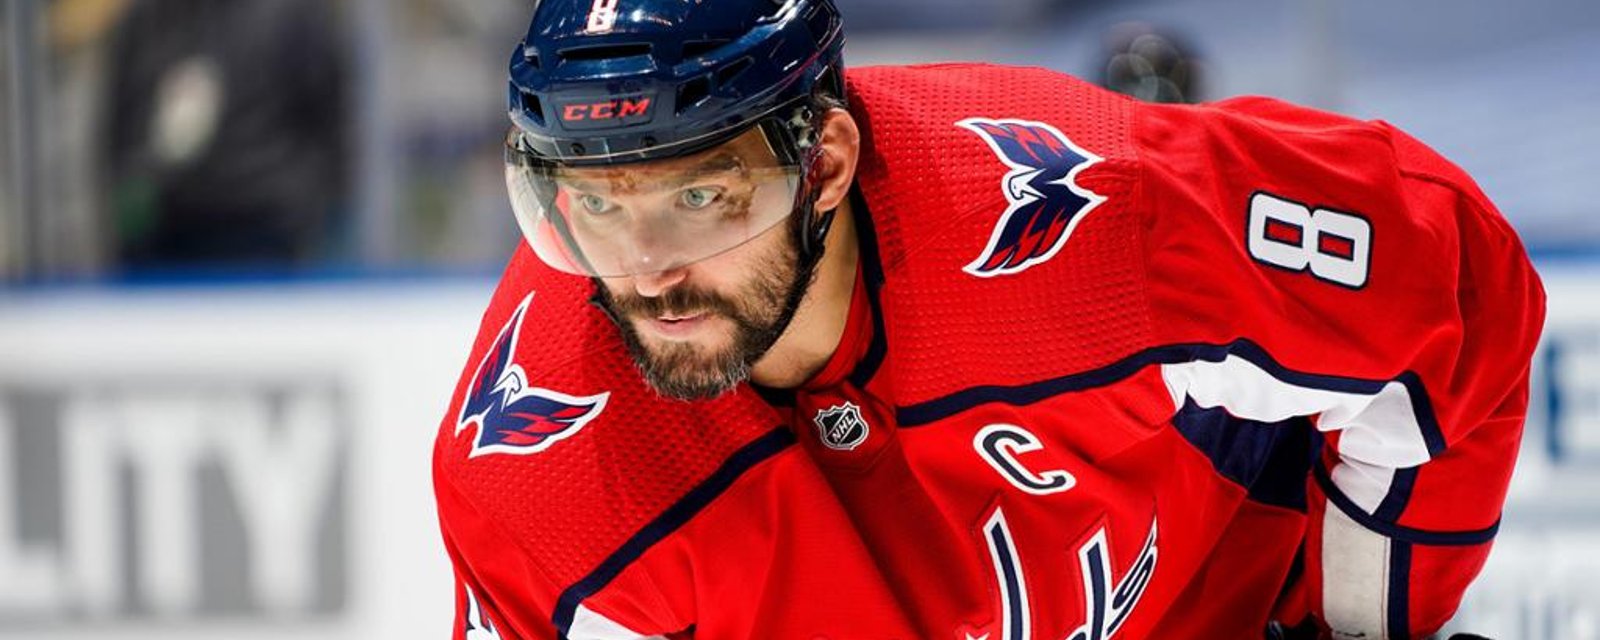 Alex Ovechkin caught in online controversy!